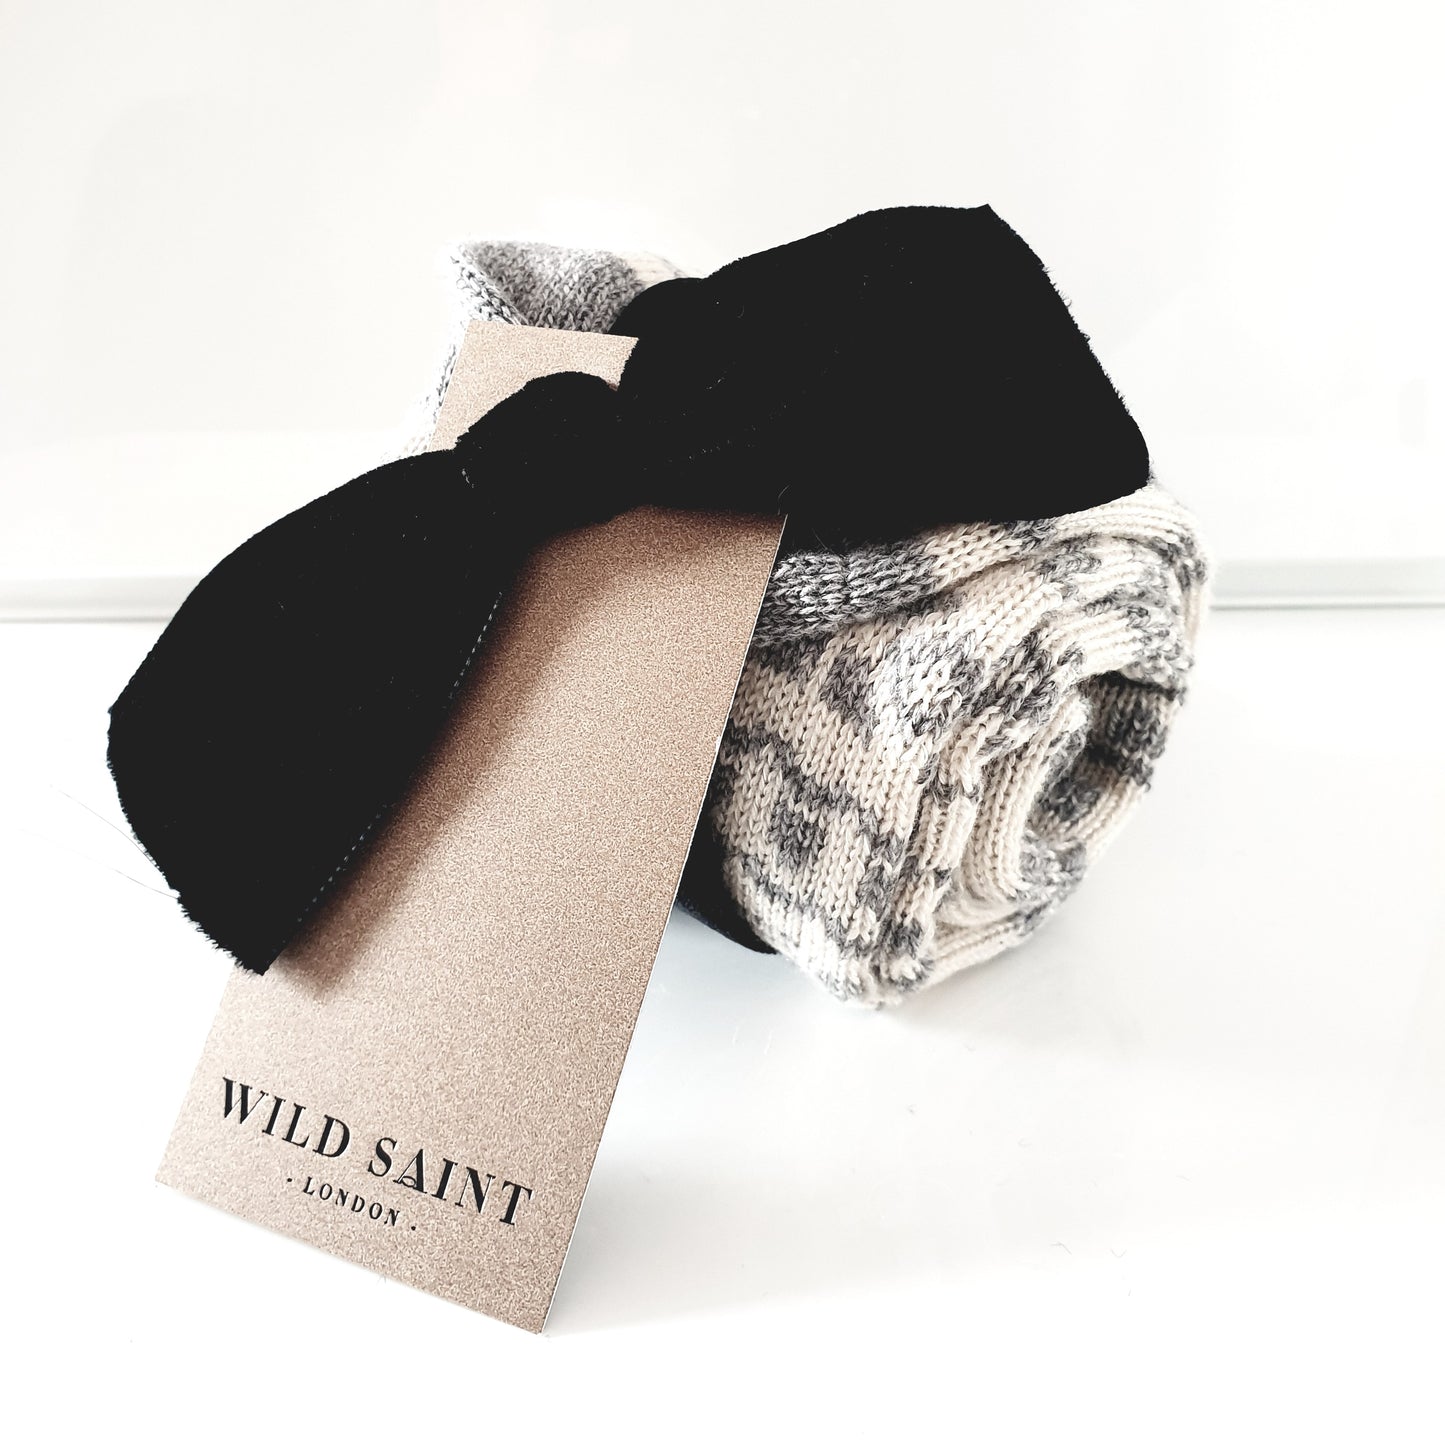 Grey and ecru cream calf length cashmere socks made in the UK. Designed with snowflakes and a leaping deer these cashmere socks are luxury loungewear for women and men